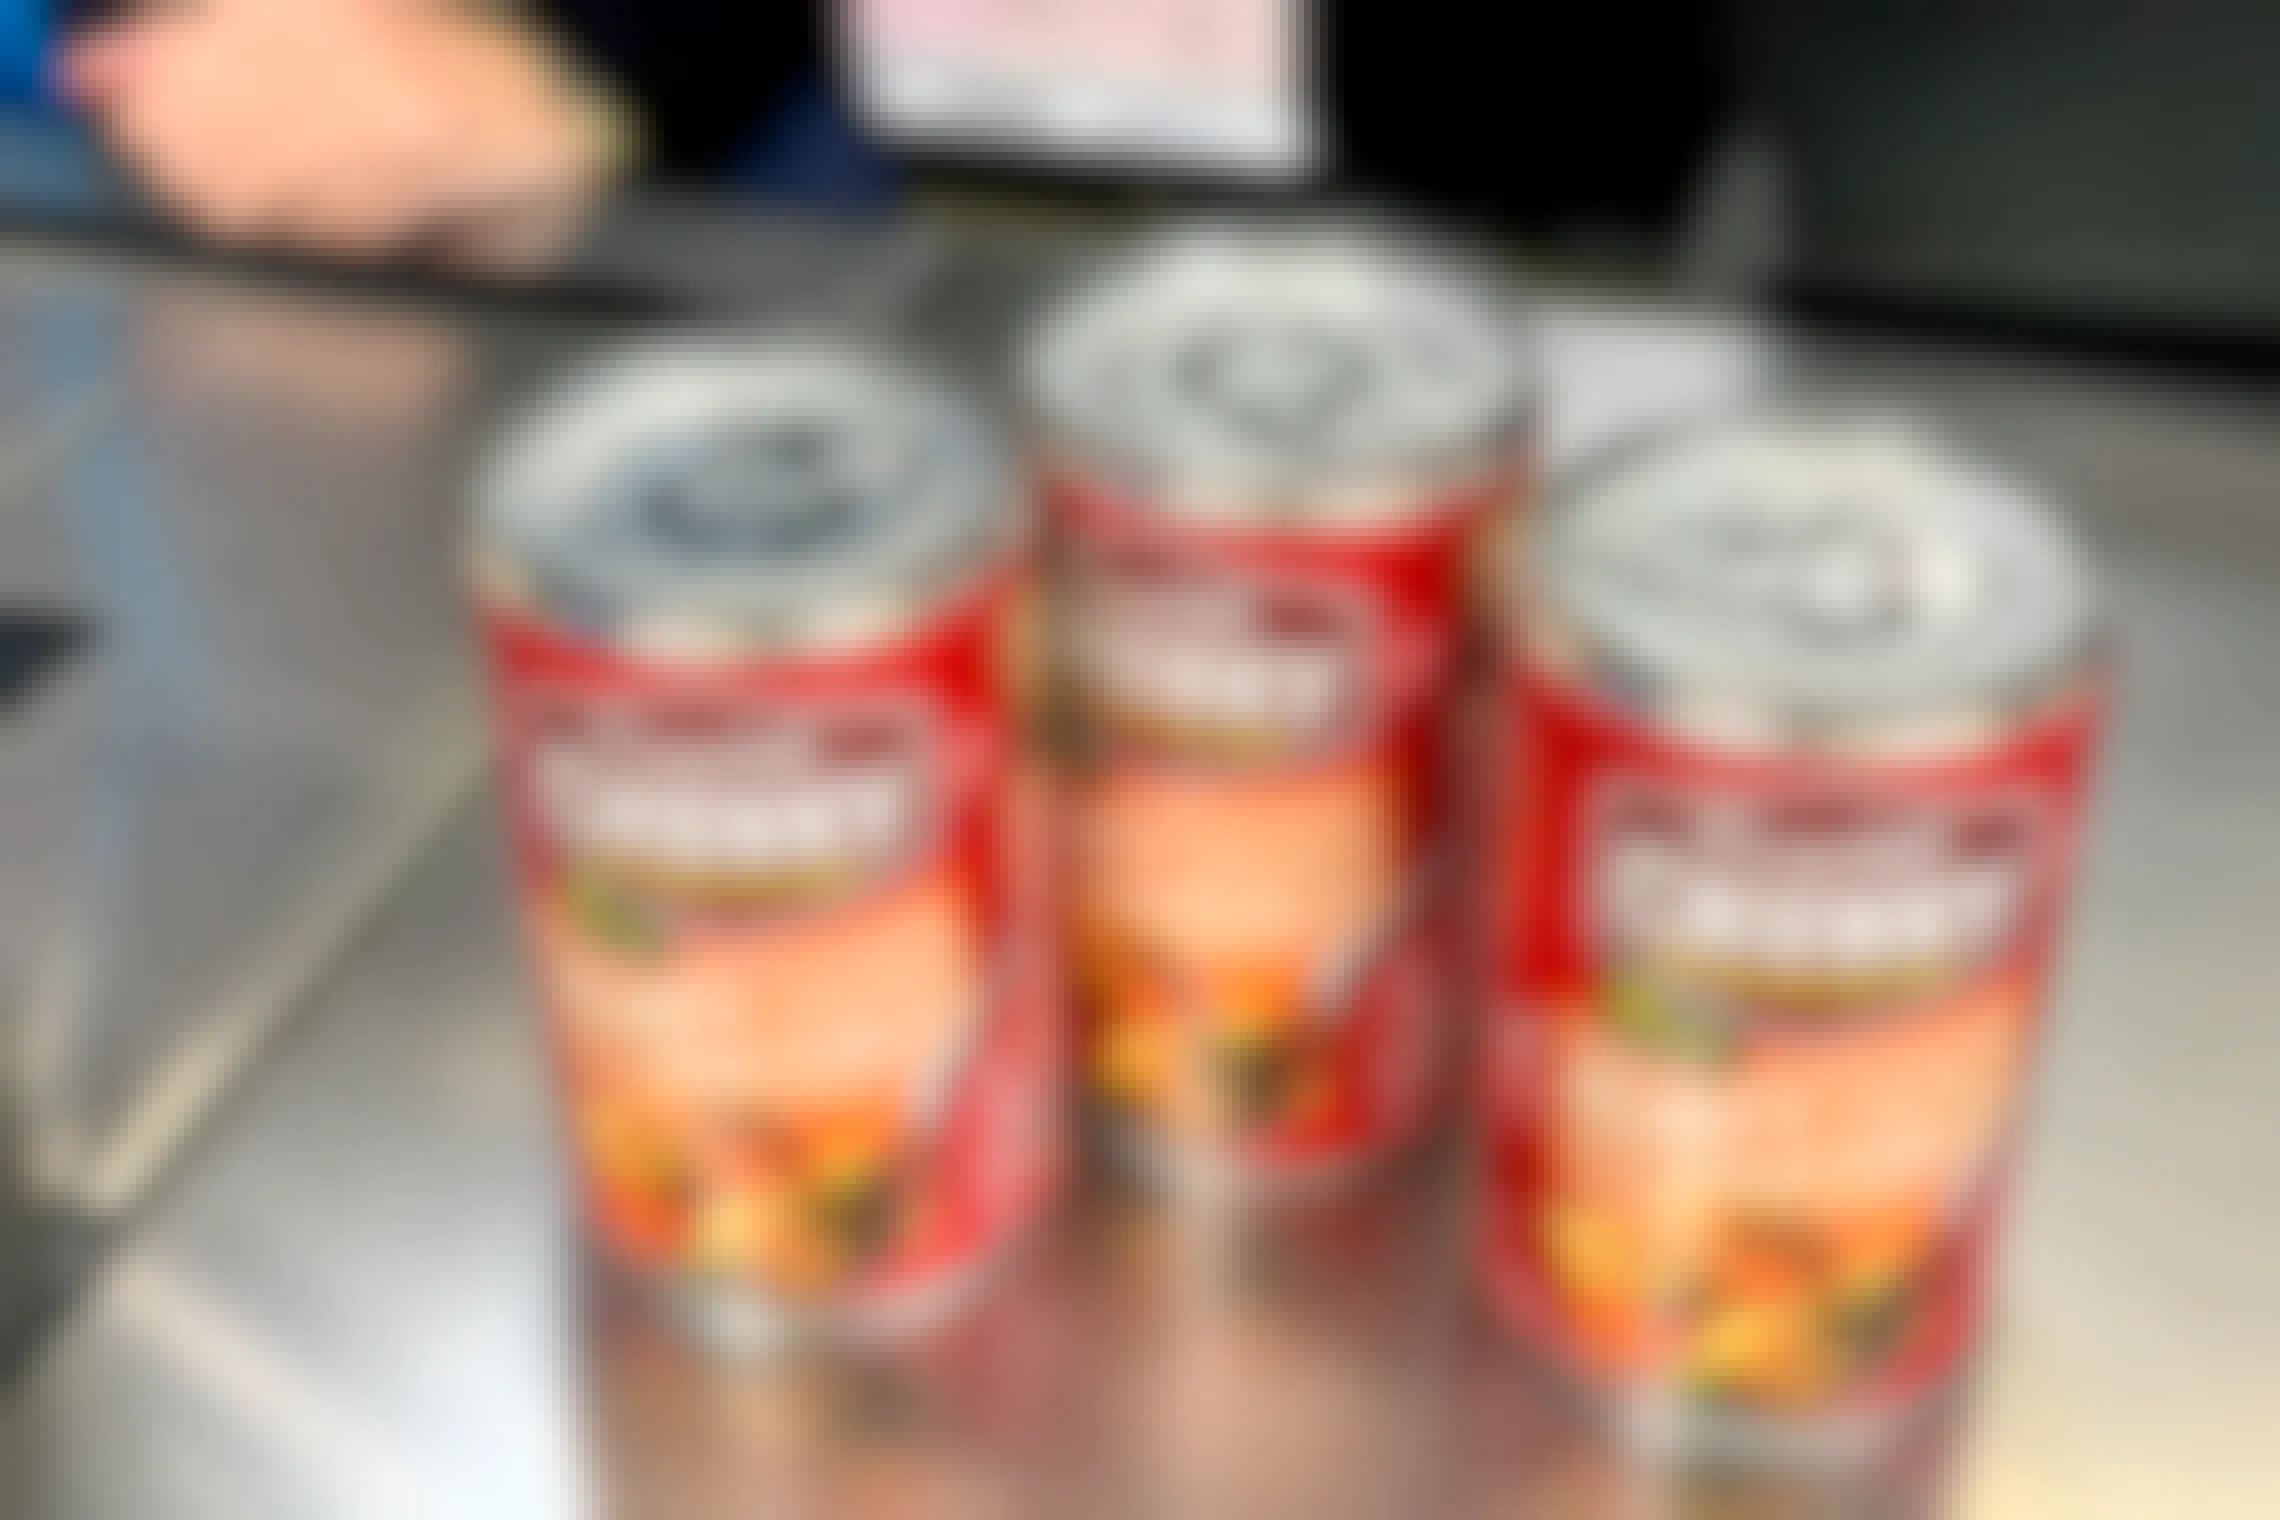 Three cans of chicken vegetable stew on the return counter at walmart